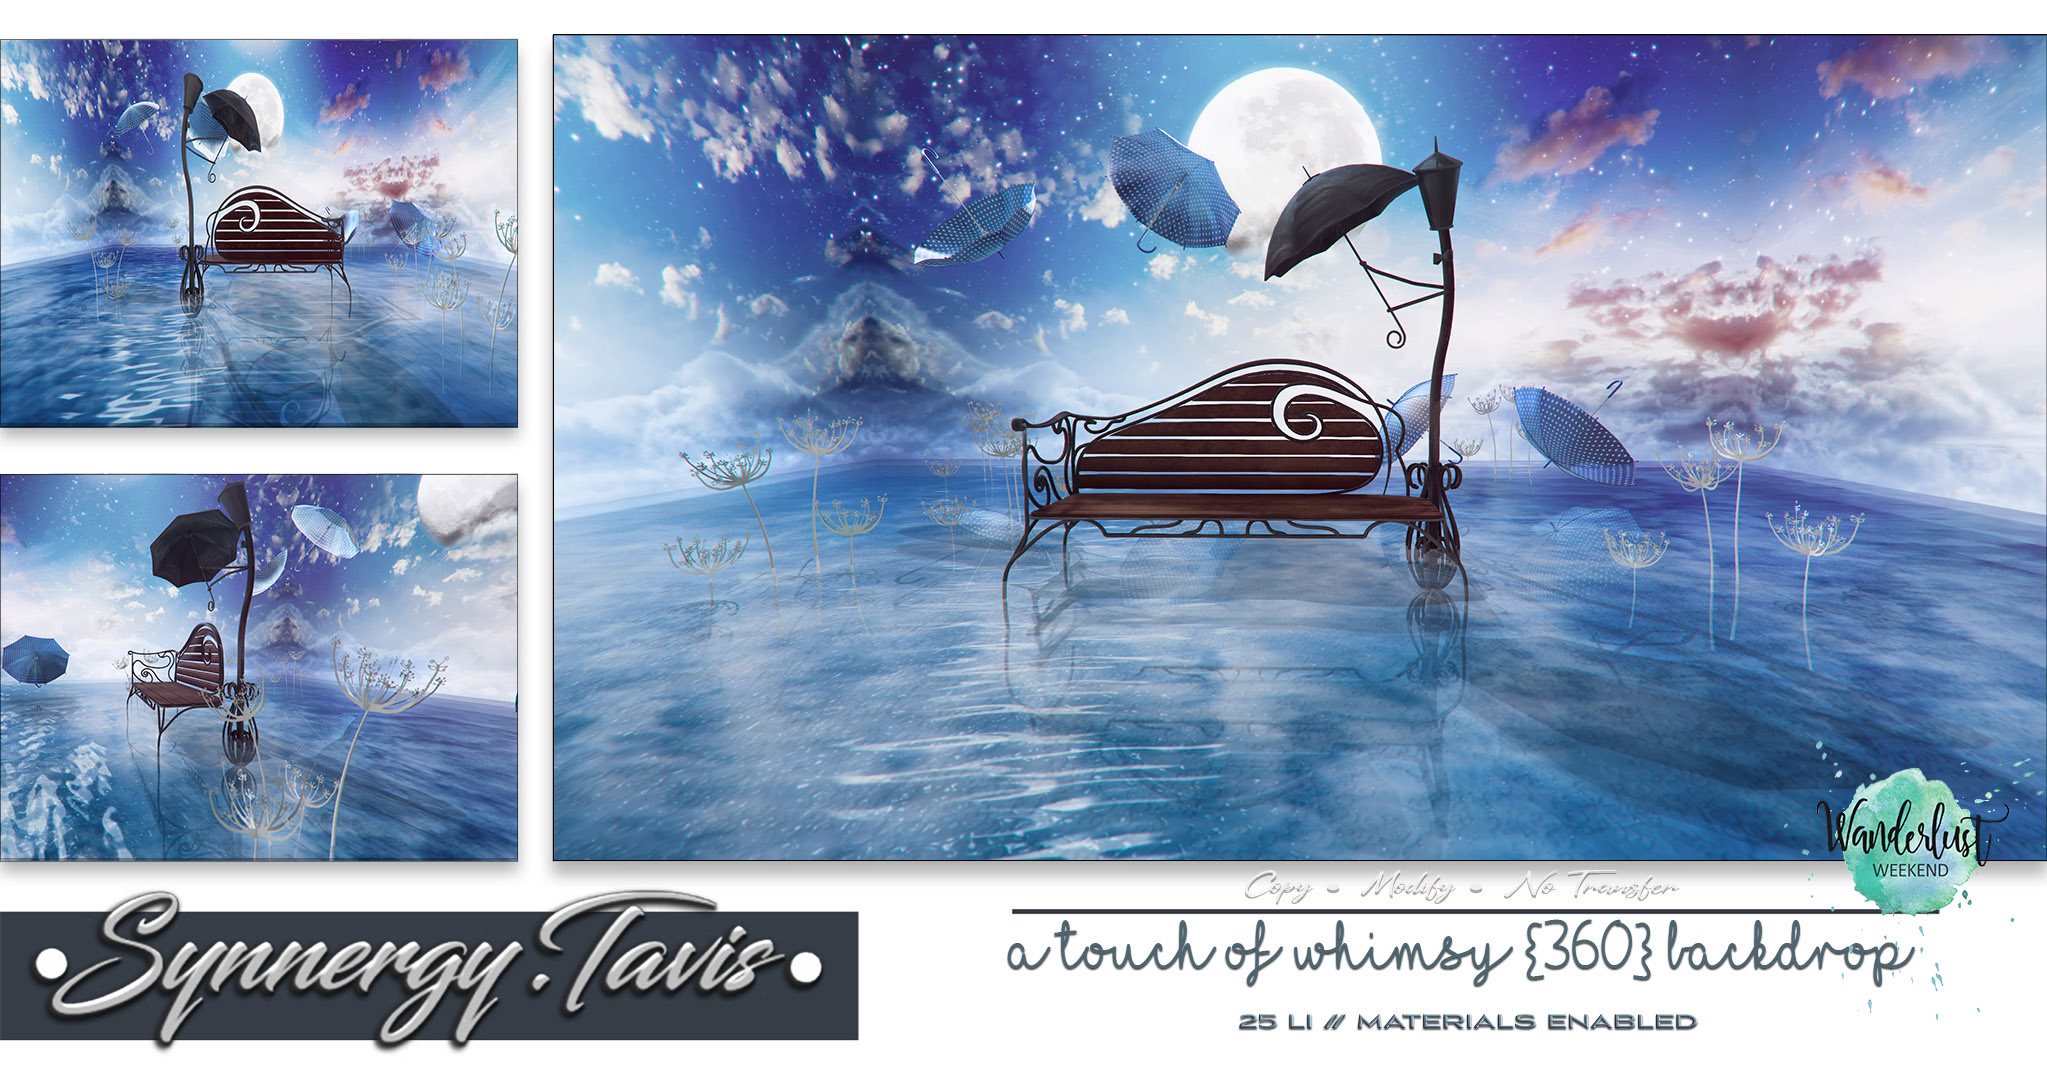 Synnergy.Tavis – A Touch of Whimsy Backdrop